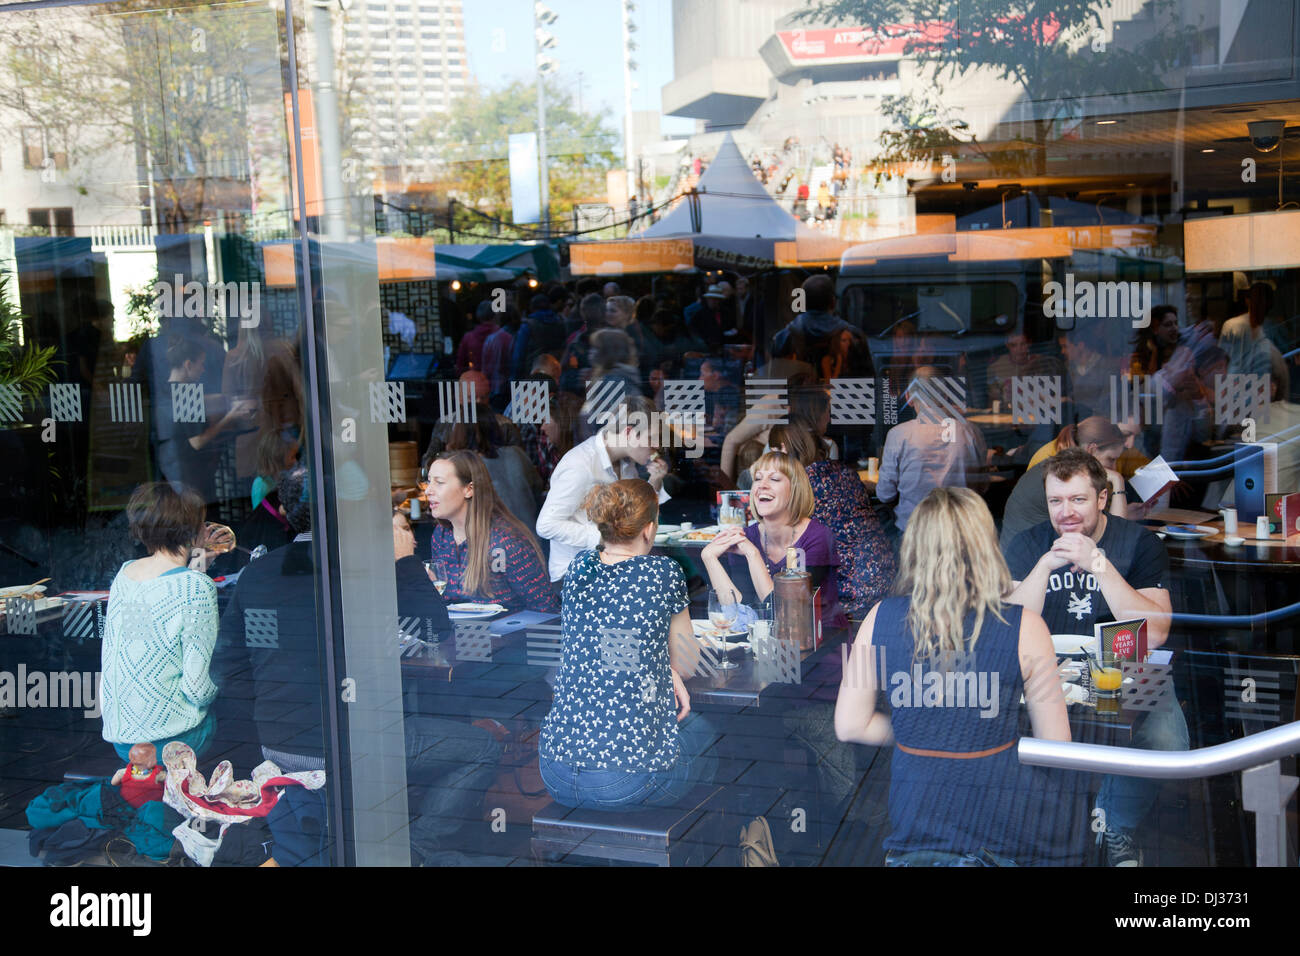 People Dining at Ping Pong Through Window, at Ping Pong Restaurant at Royal Festival Hall in London - UK Stock Photo